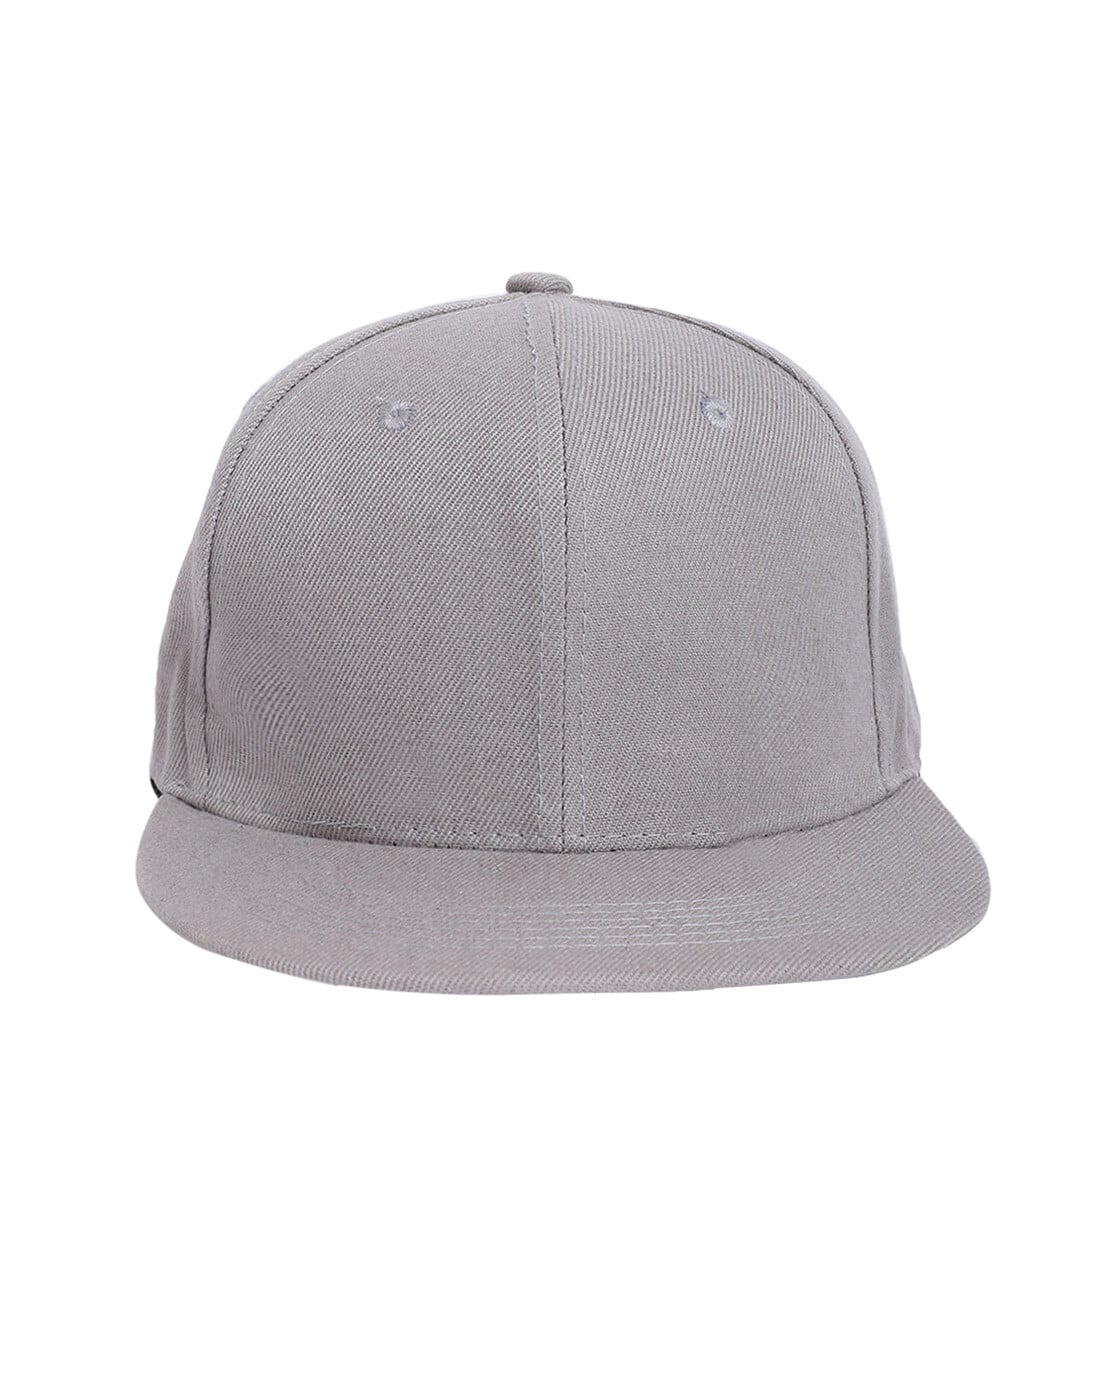 Buy Grey Caps & Hats for Men by Quirky Online